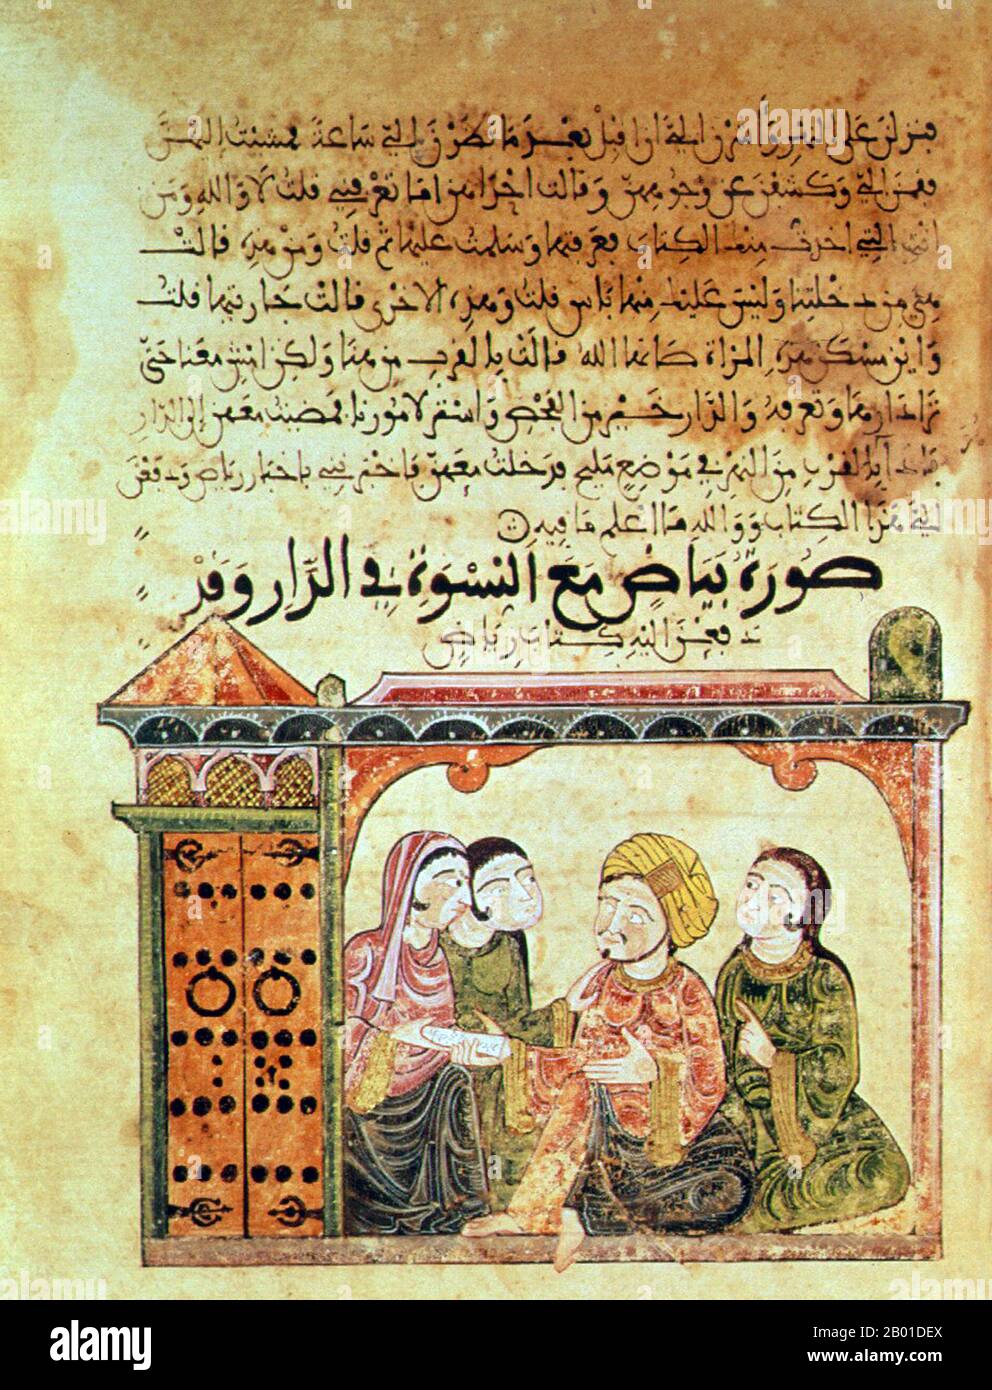 Hadith Bayāḍ wa Riyāḍ (The Story of Bayad and Riyad) or Qissat Bayad wa Riyad is a 13th-century Arabic love story. The main characters of the tale are Bayad, a merchant's son and a foreigner from Damascus, Riyad, a well educated girl in the court of an unnamed Hajib (vizier or minister) of 'Iraq (Mesopotamia) and a 'Lady' (al-sayyida).  The Hadith Bayad wa Riyad manuscript is believed to be the only illustrated manuscript known to have survived from more than eight centuries of Muslim and Arab presence in Spain. The sole manuscript is in the Vatican Library, where it is catalogued as Codex Vat Stock Photo